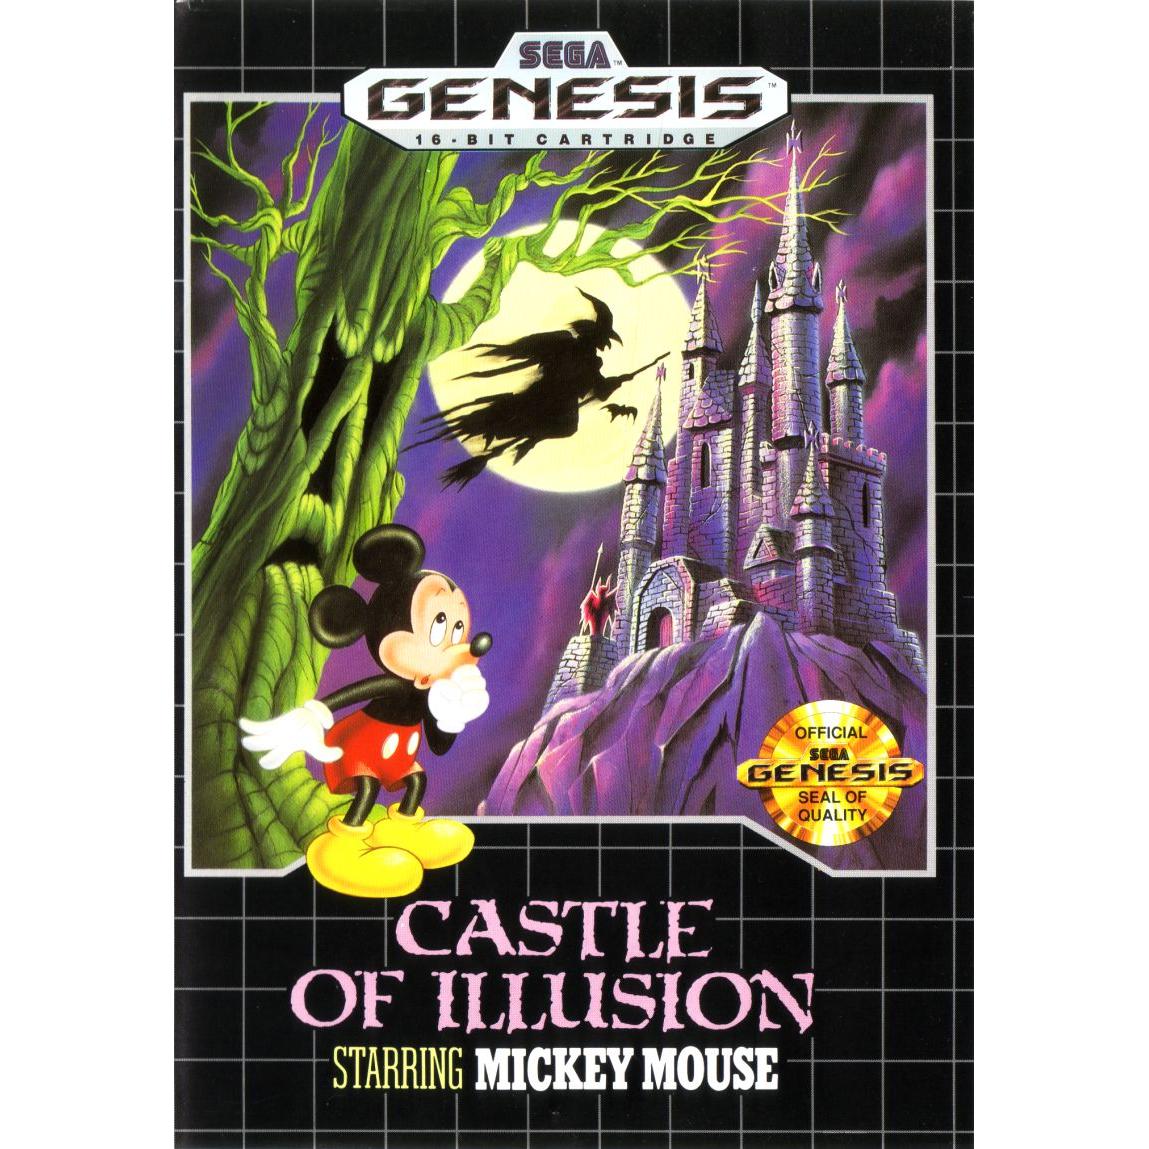 Castle of Illusion Starring Mickey Mouse - Sega Genesis Game Complete - YourGamingShop.com - Buy, Sell, Trade Video Games Online. 120 Day Warranty. Satisfaction Guaranteed.